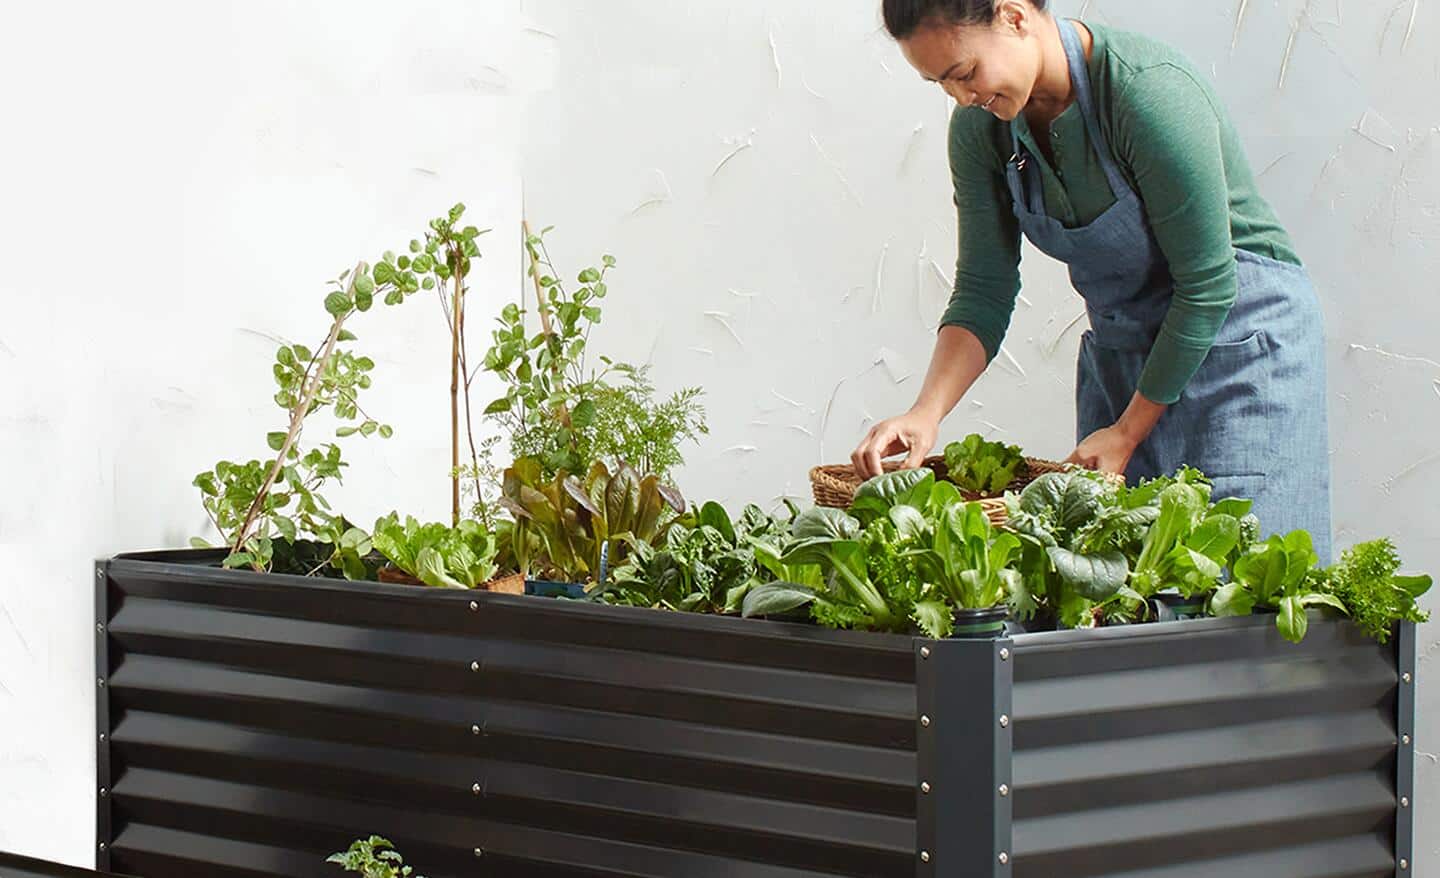 A person tending to greenery that are inside a black elevated garden bed.